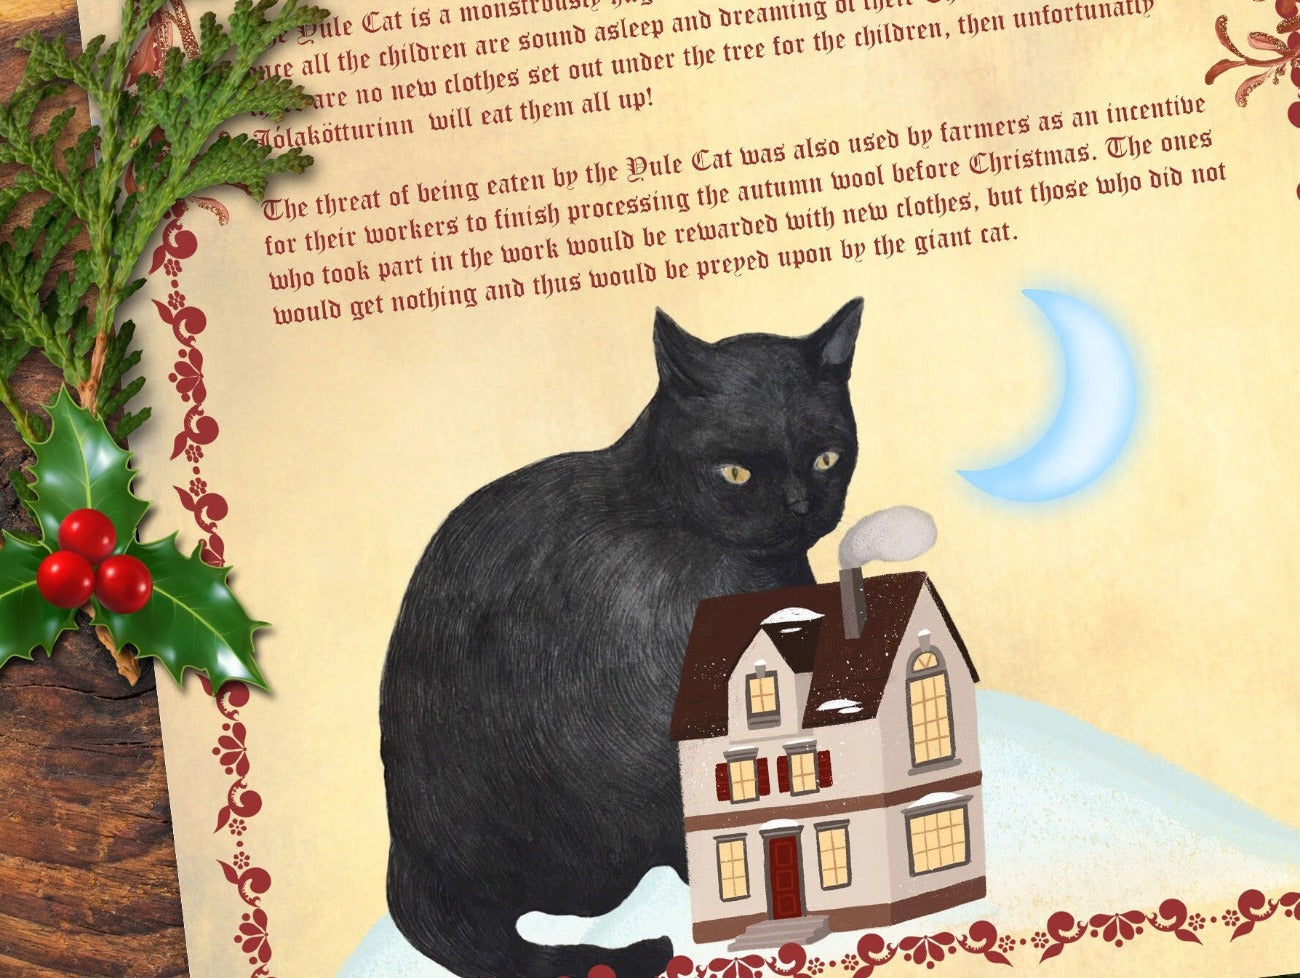 ICELANDIC YULE CAT Legend, Jólakötturinn The Christmas Cat of Iceland, Christmas Cat Monster, He will eat you if you don&#39;t get new clothes! - Morgana Magick Spell